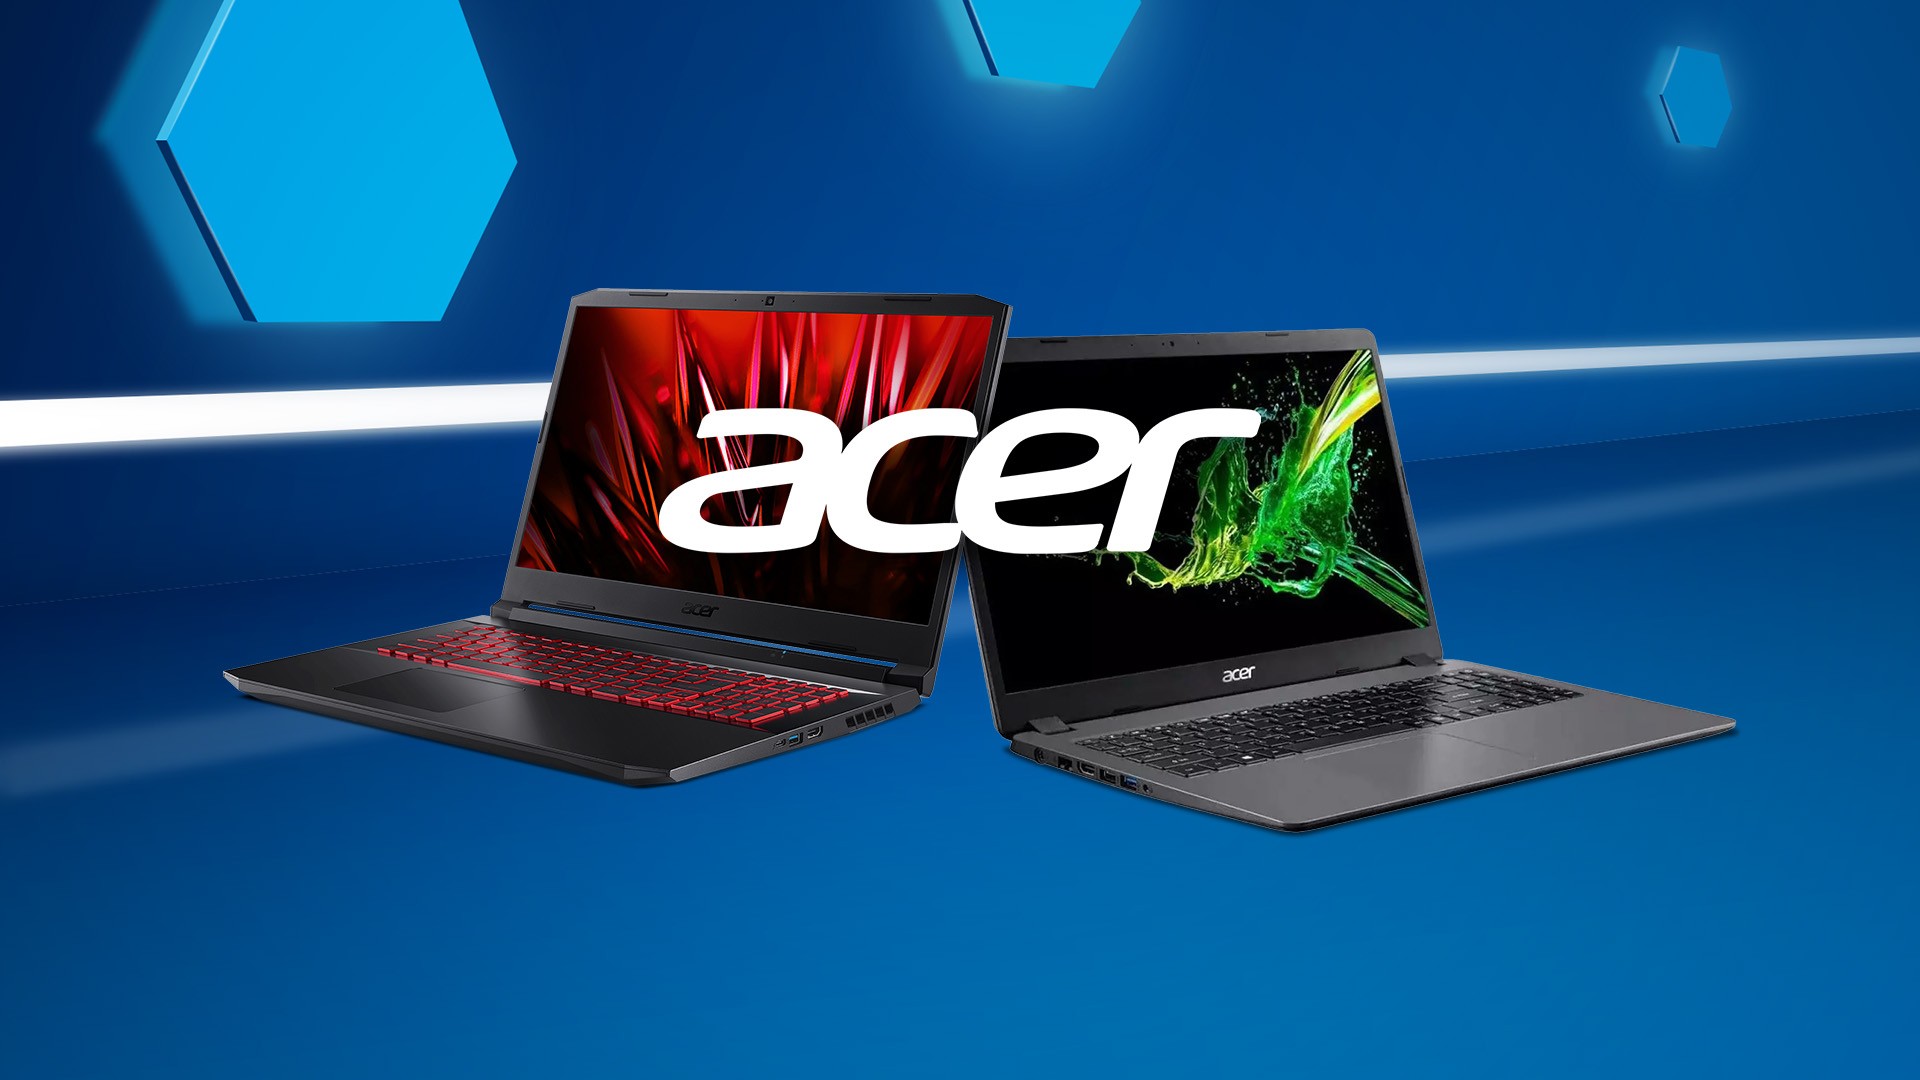 Local production: Acer launches Nitro 5 and Aspire 3 notebooks with Intel and AMD processors in Brazil
